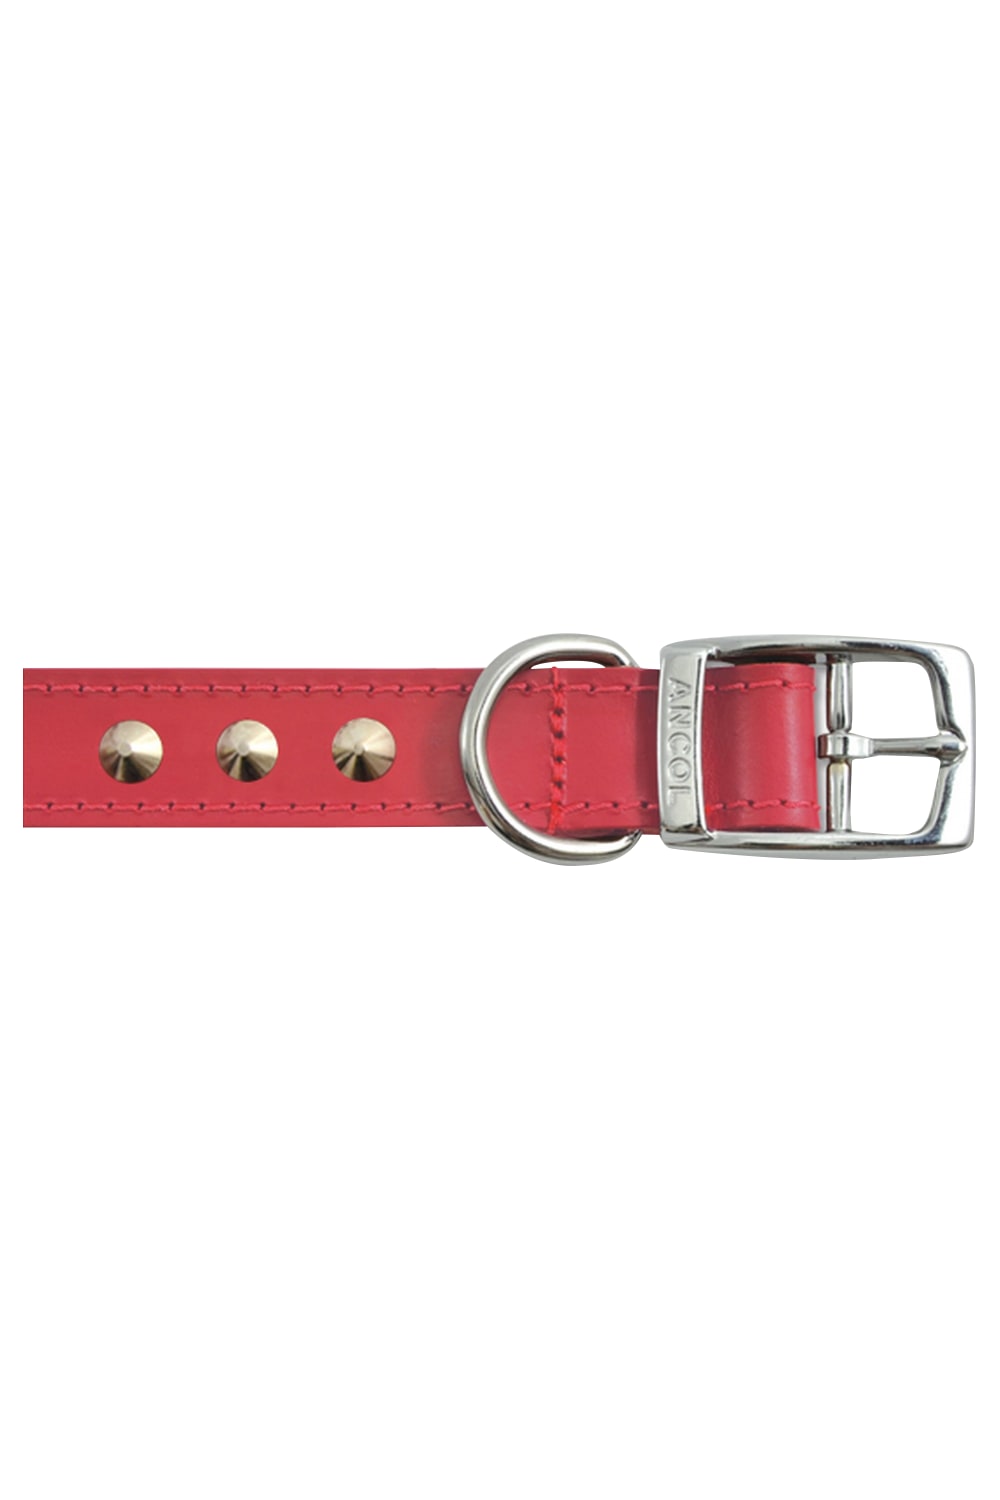 Ancol Pet Products Heritage Leather Studded Dog Collar (Red) (Size 7)